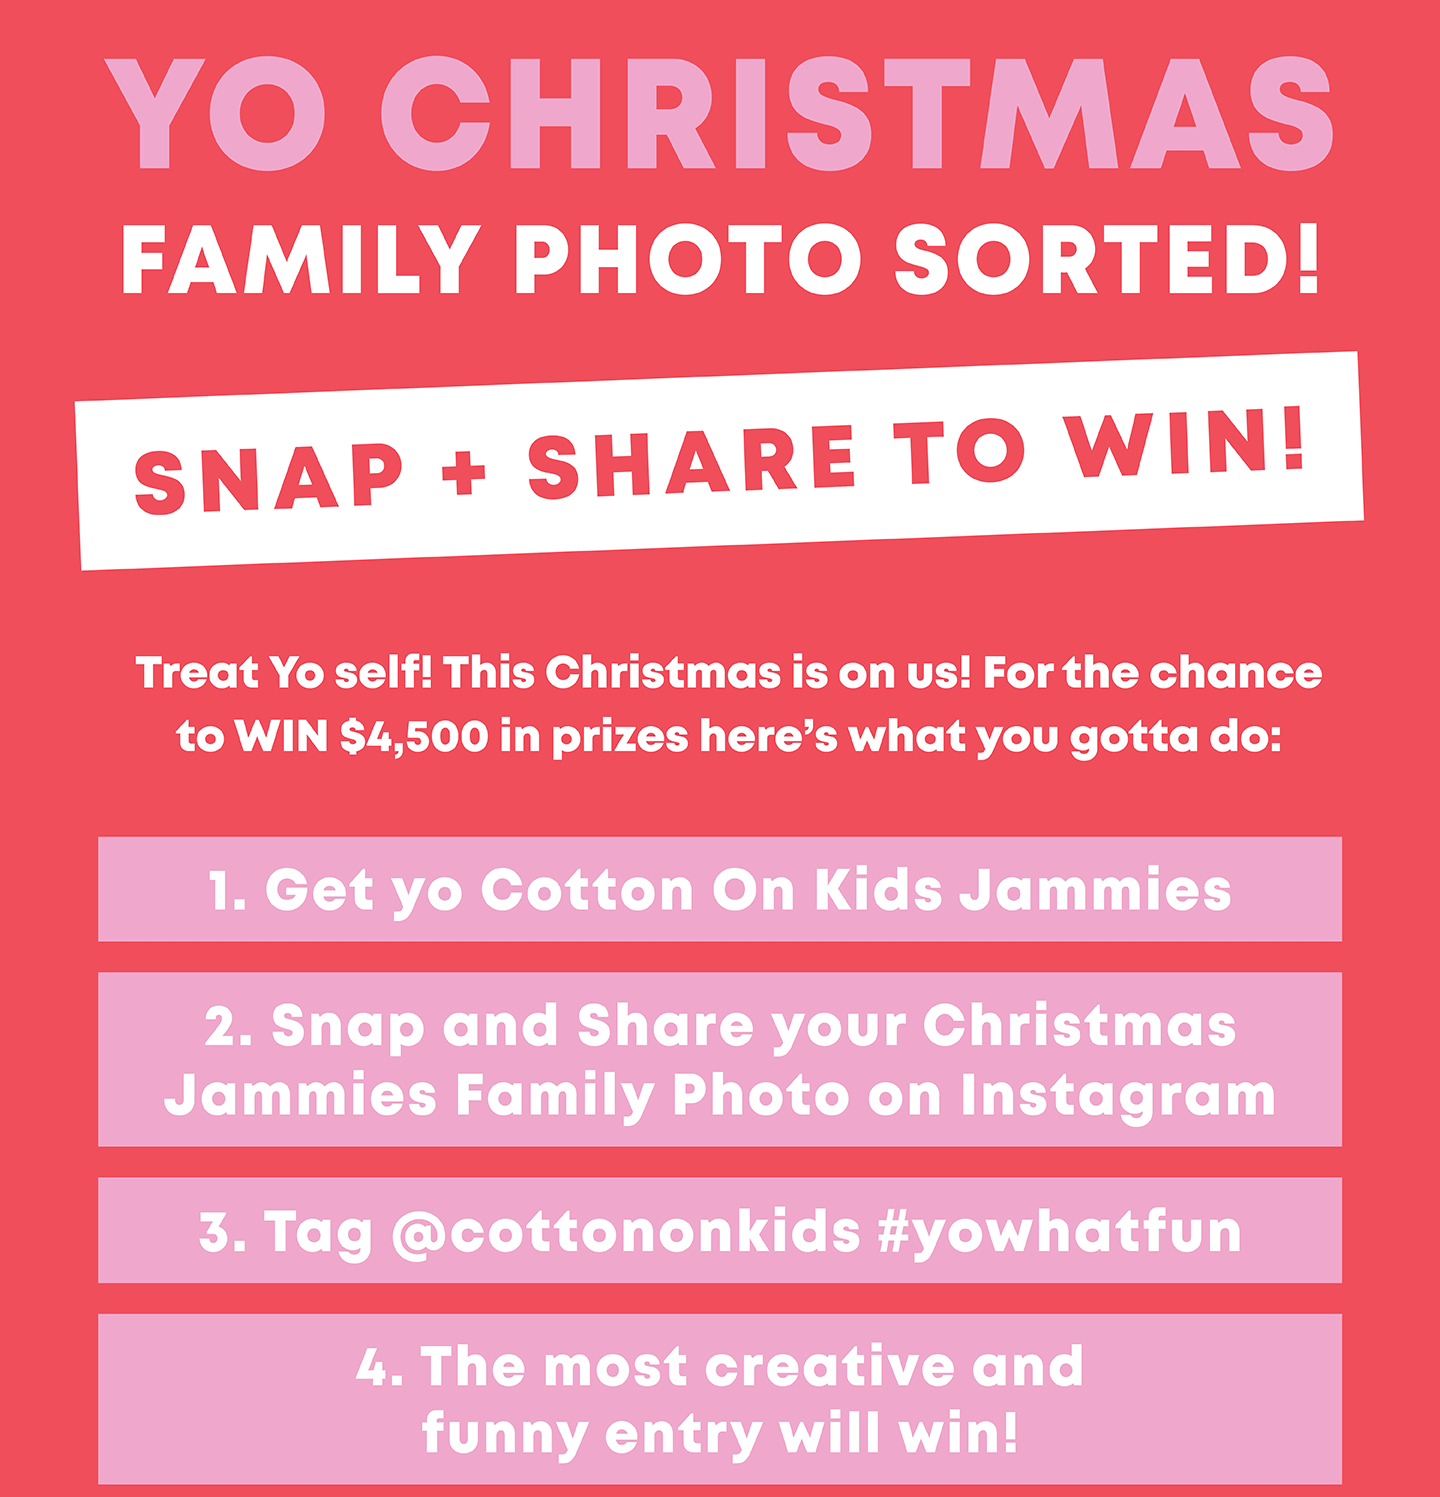 Snap and Share to Win